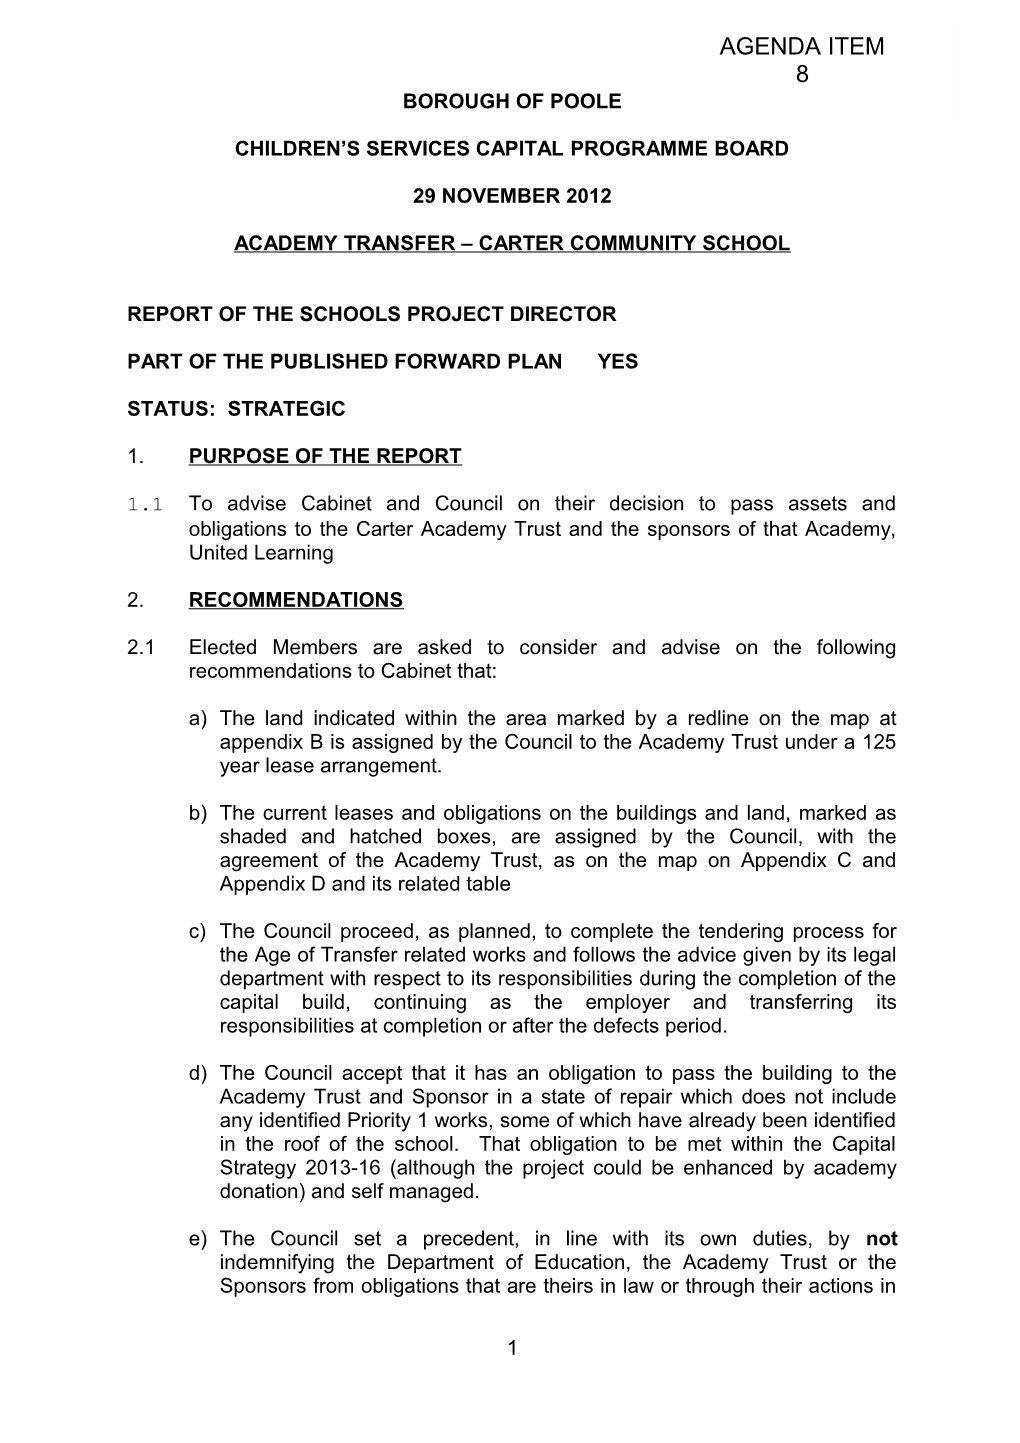 School Organisation: Proposal to Consult on Combining Hillbourne First School and Nursery